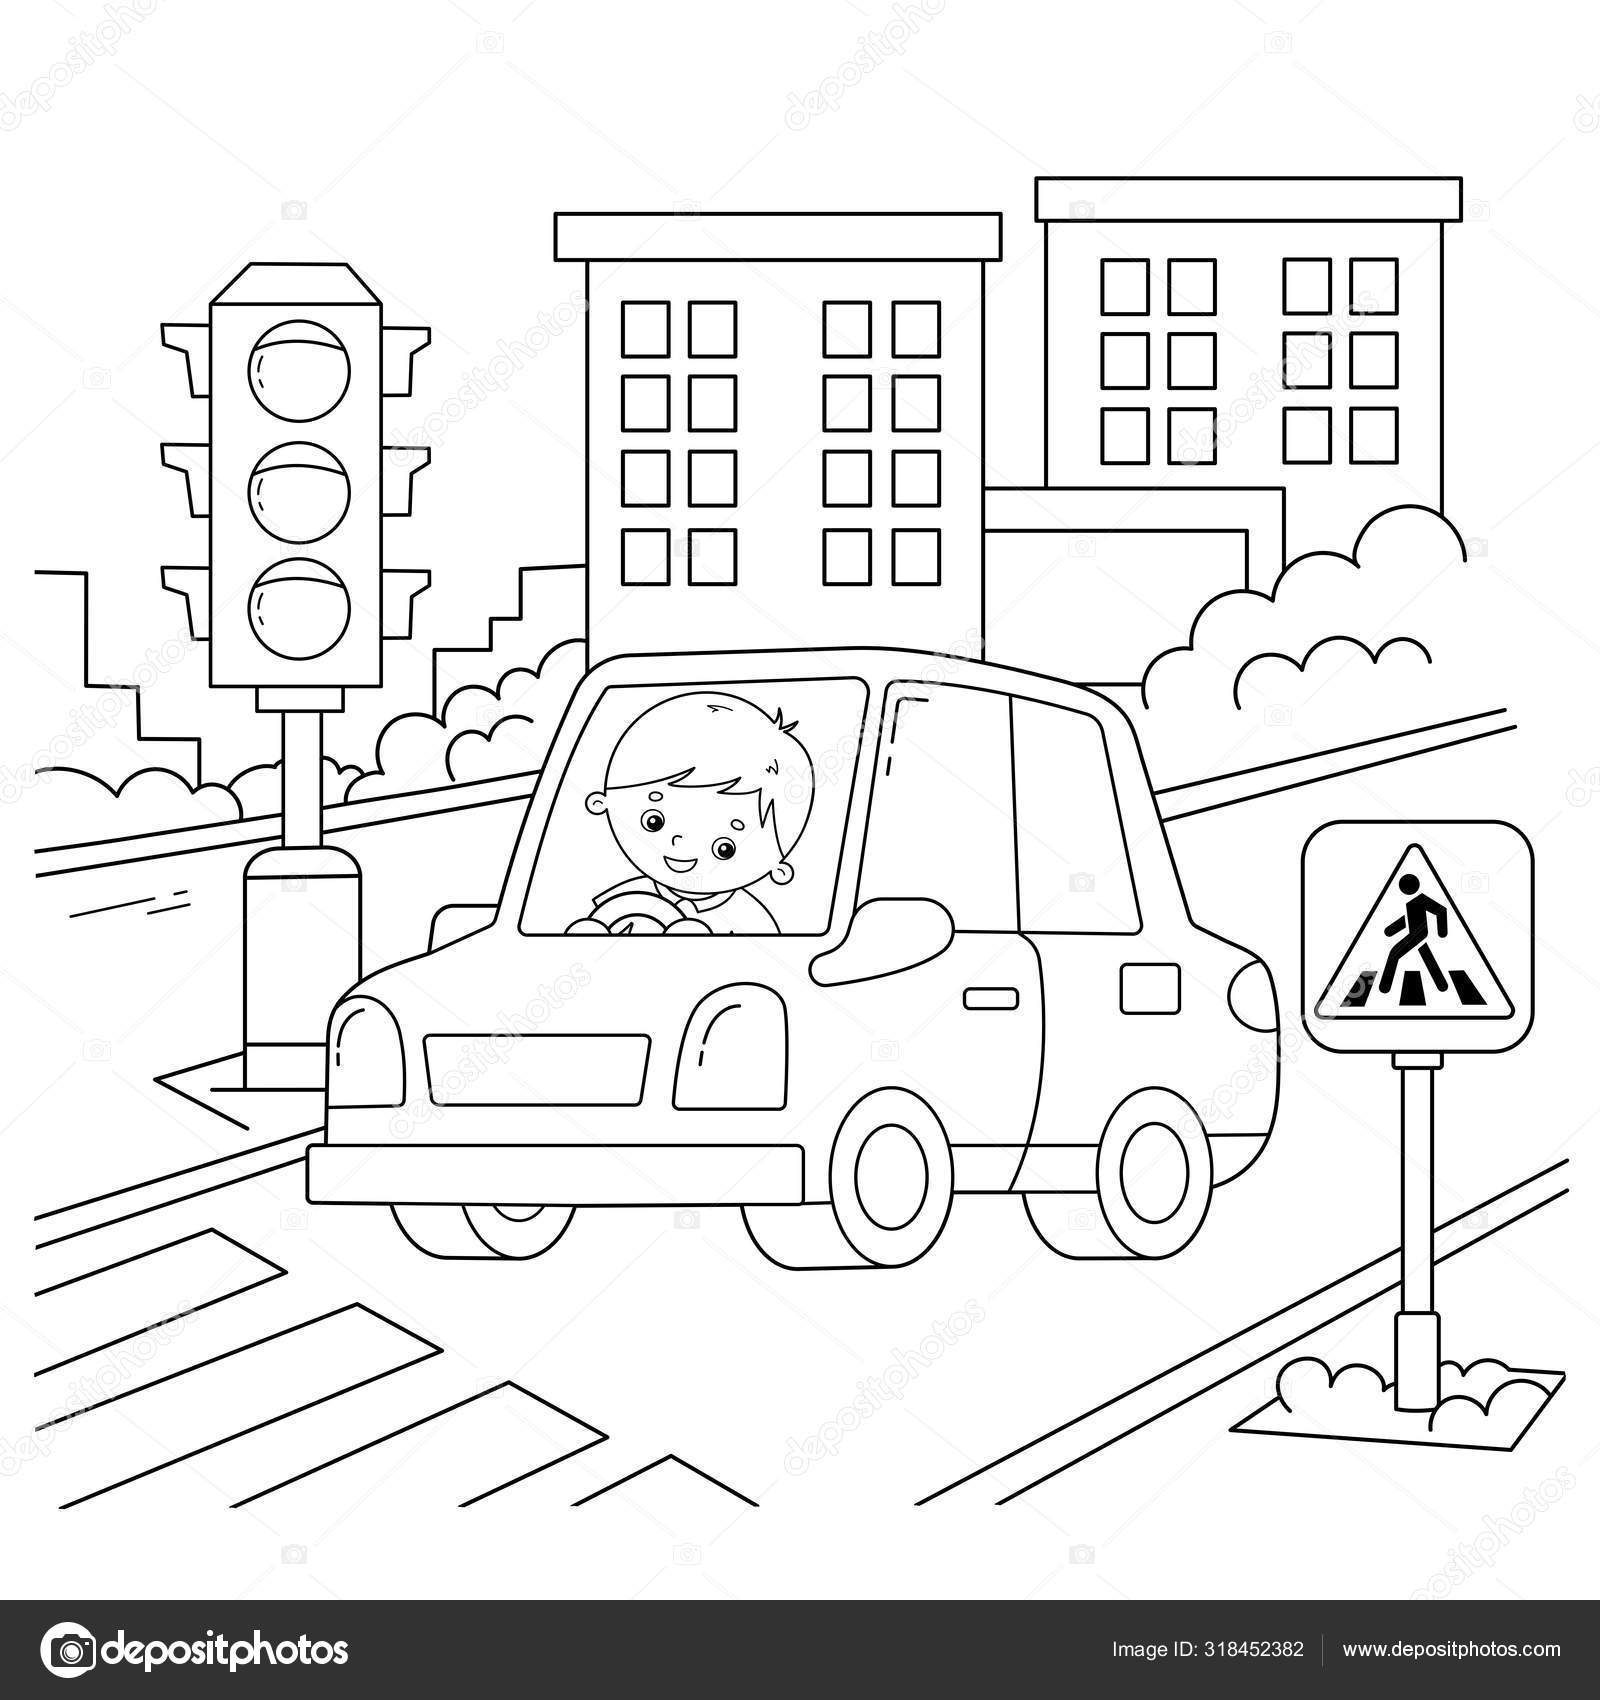 coloring-pages-traffic-light